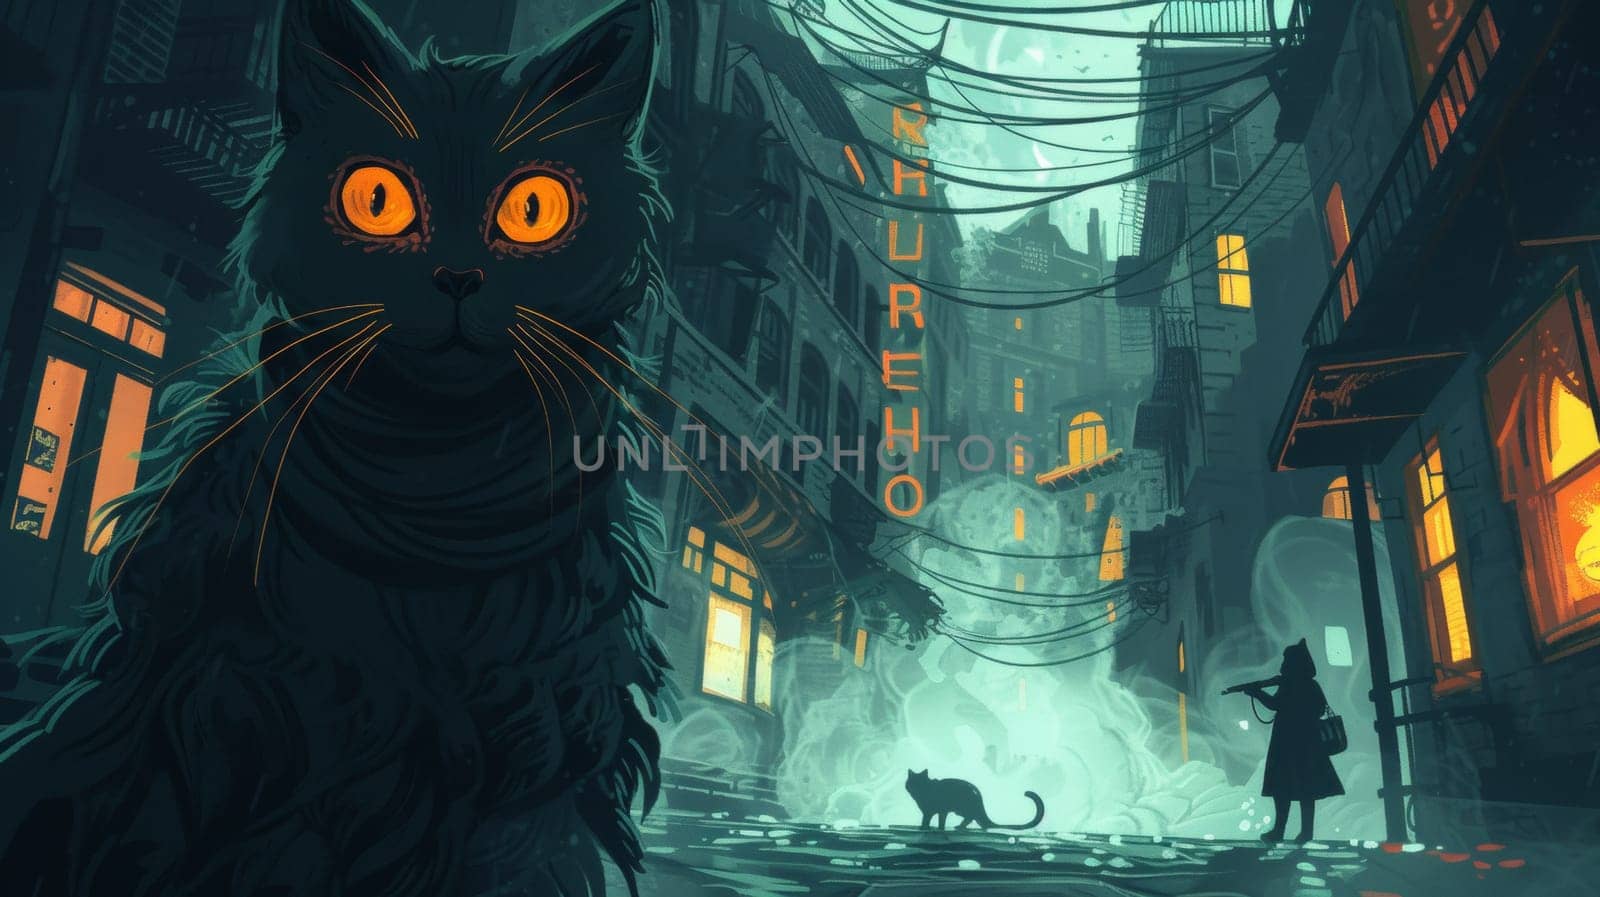 A black cat with orange eyes in a dark alleyway, AI by starush